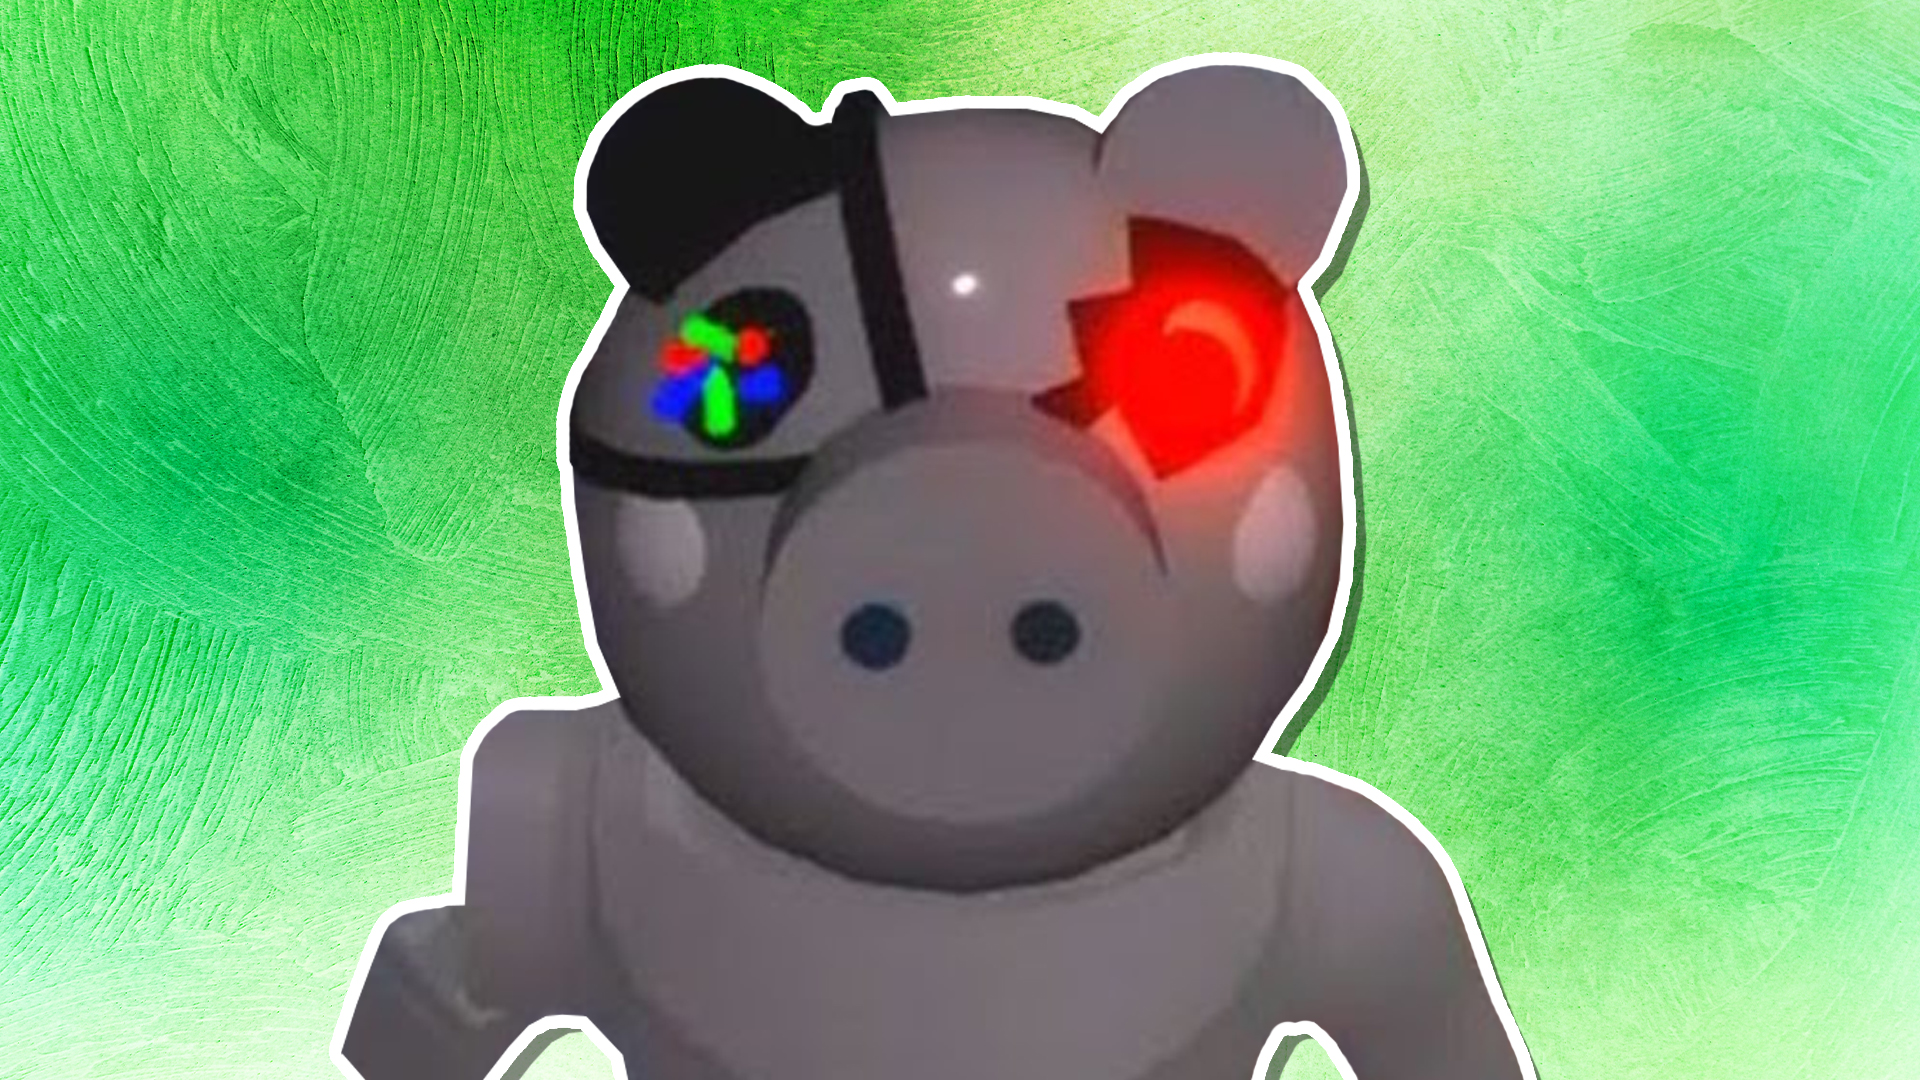 How to UNLOCK HAPPY in PIGGY BOOK 2 BUT IT'S 100 PLAYERS! - Roblox 